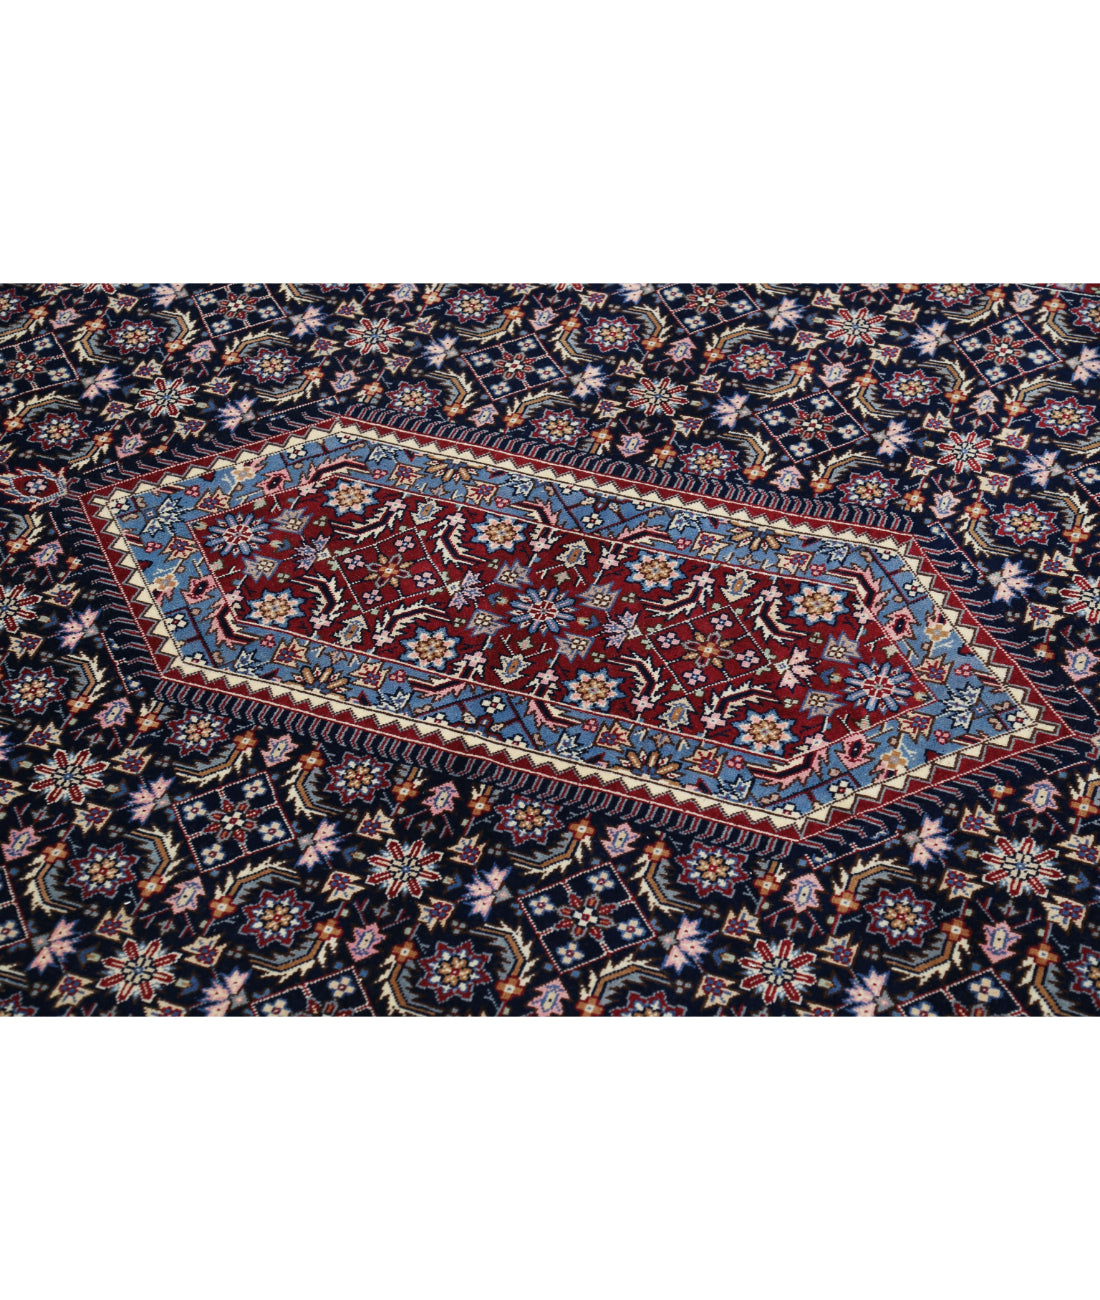 Hand Knotted Heritage Persian Style Bijar Wool Rug - 6'0'' x 9'0'' 6'0'' x 9'0'' (180 X 270) / Blue / Red